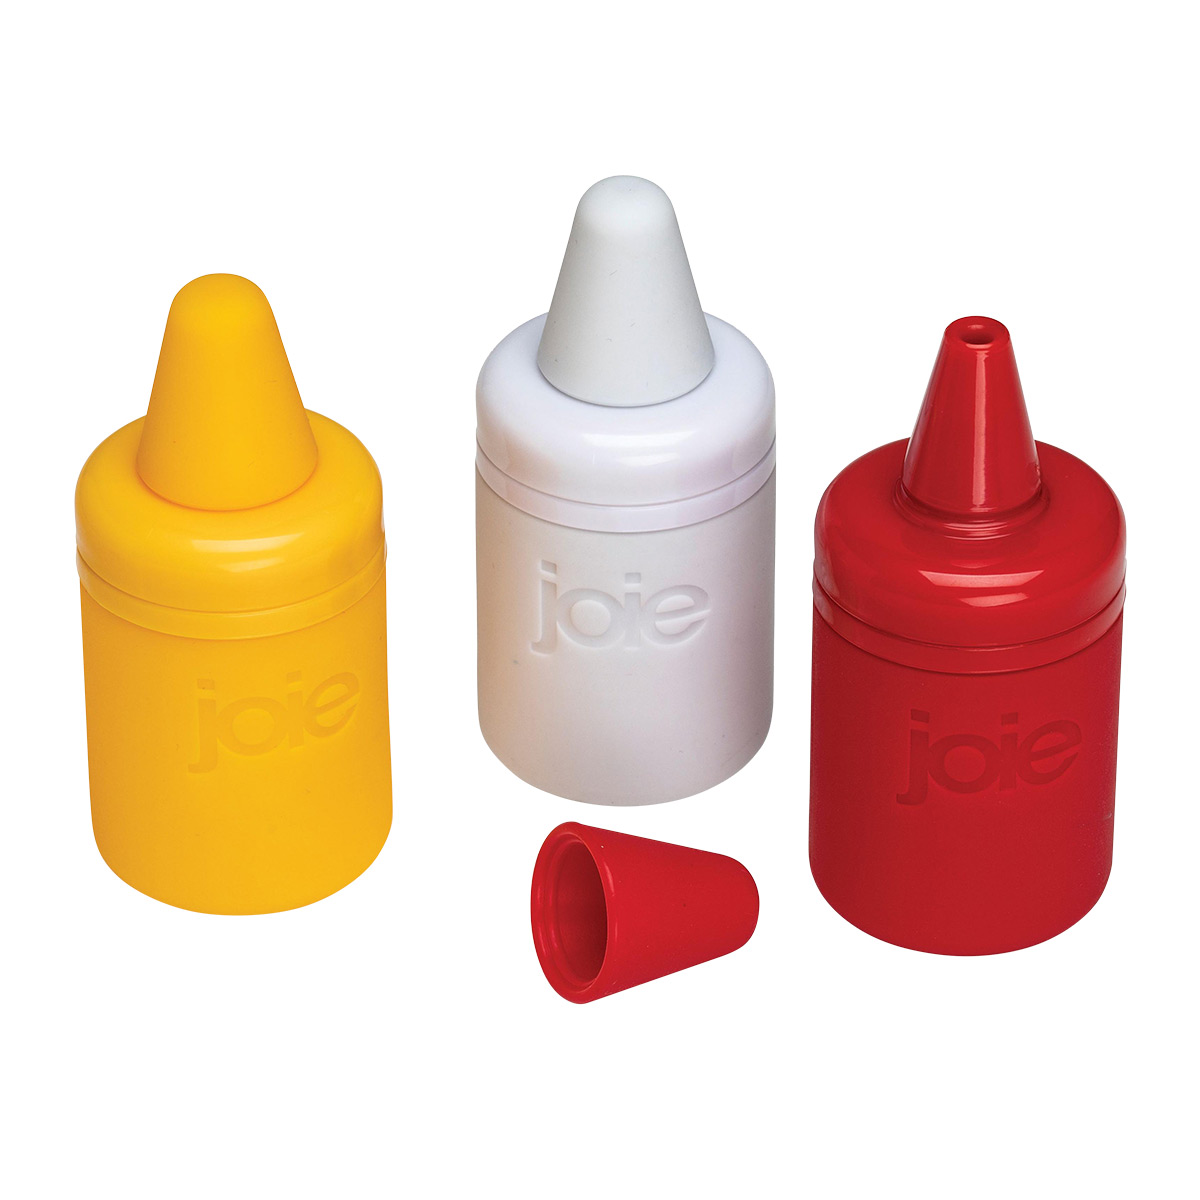 https://www.containerstore.com/catalogimages/457284/10090109-mini-refillable-condiment-b.jpg